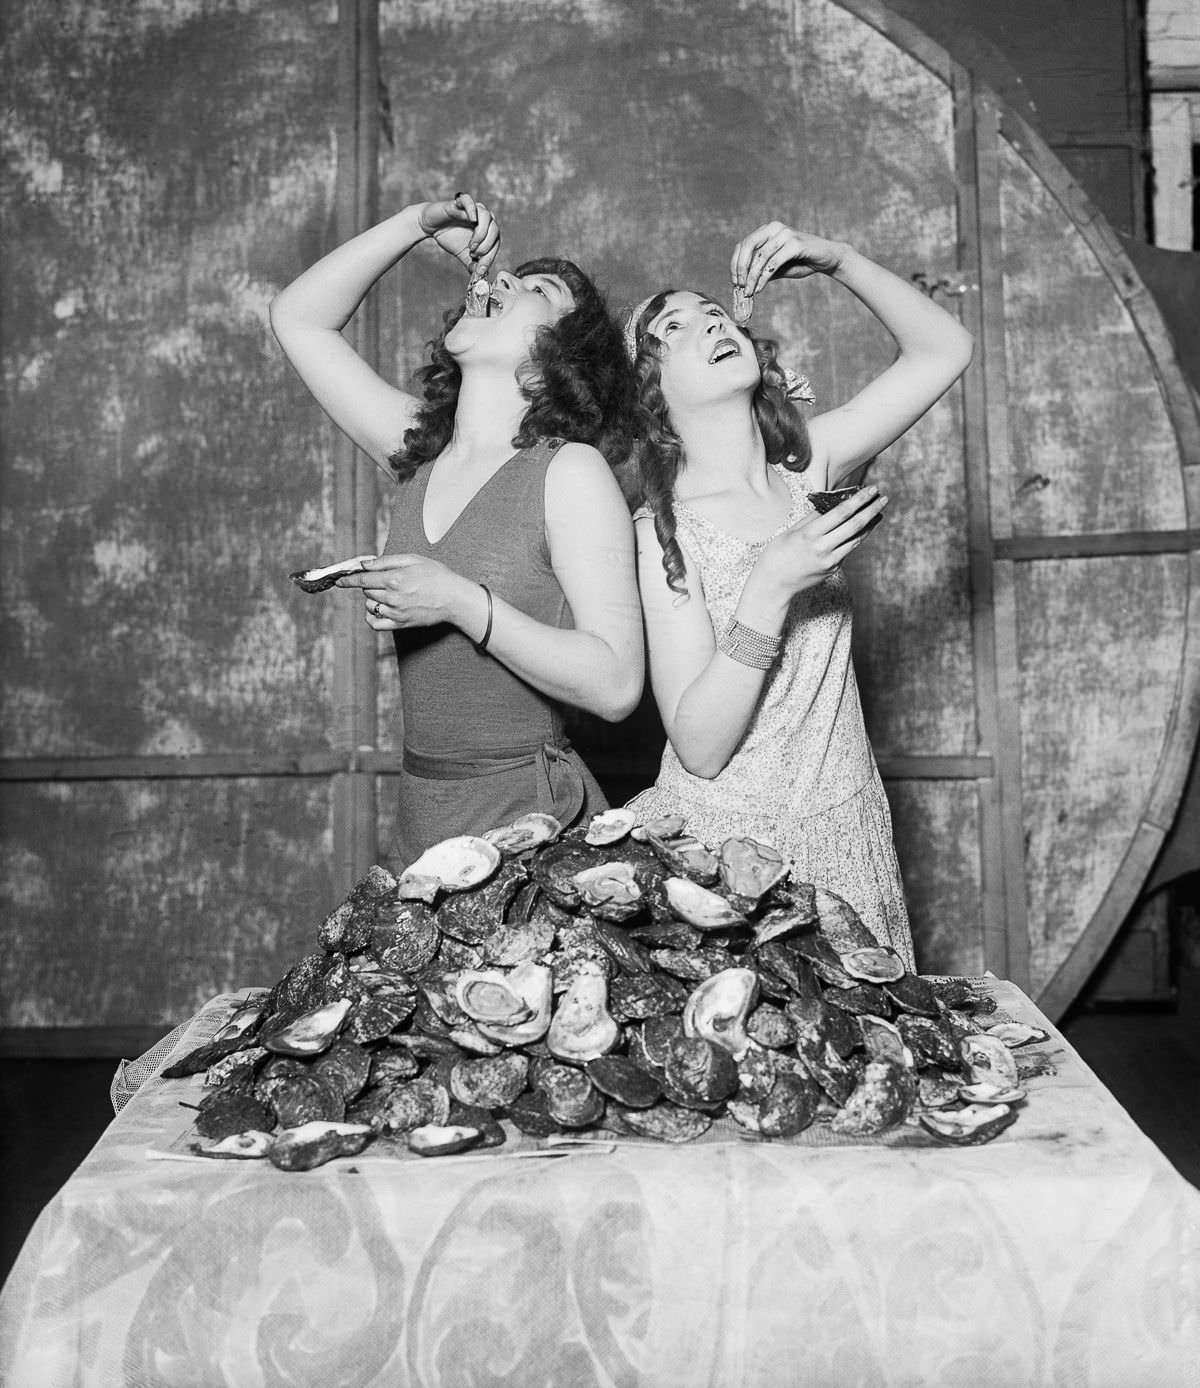 Lois and Ruth Waddell devour a combined total of 204 oysters in 1920.